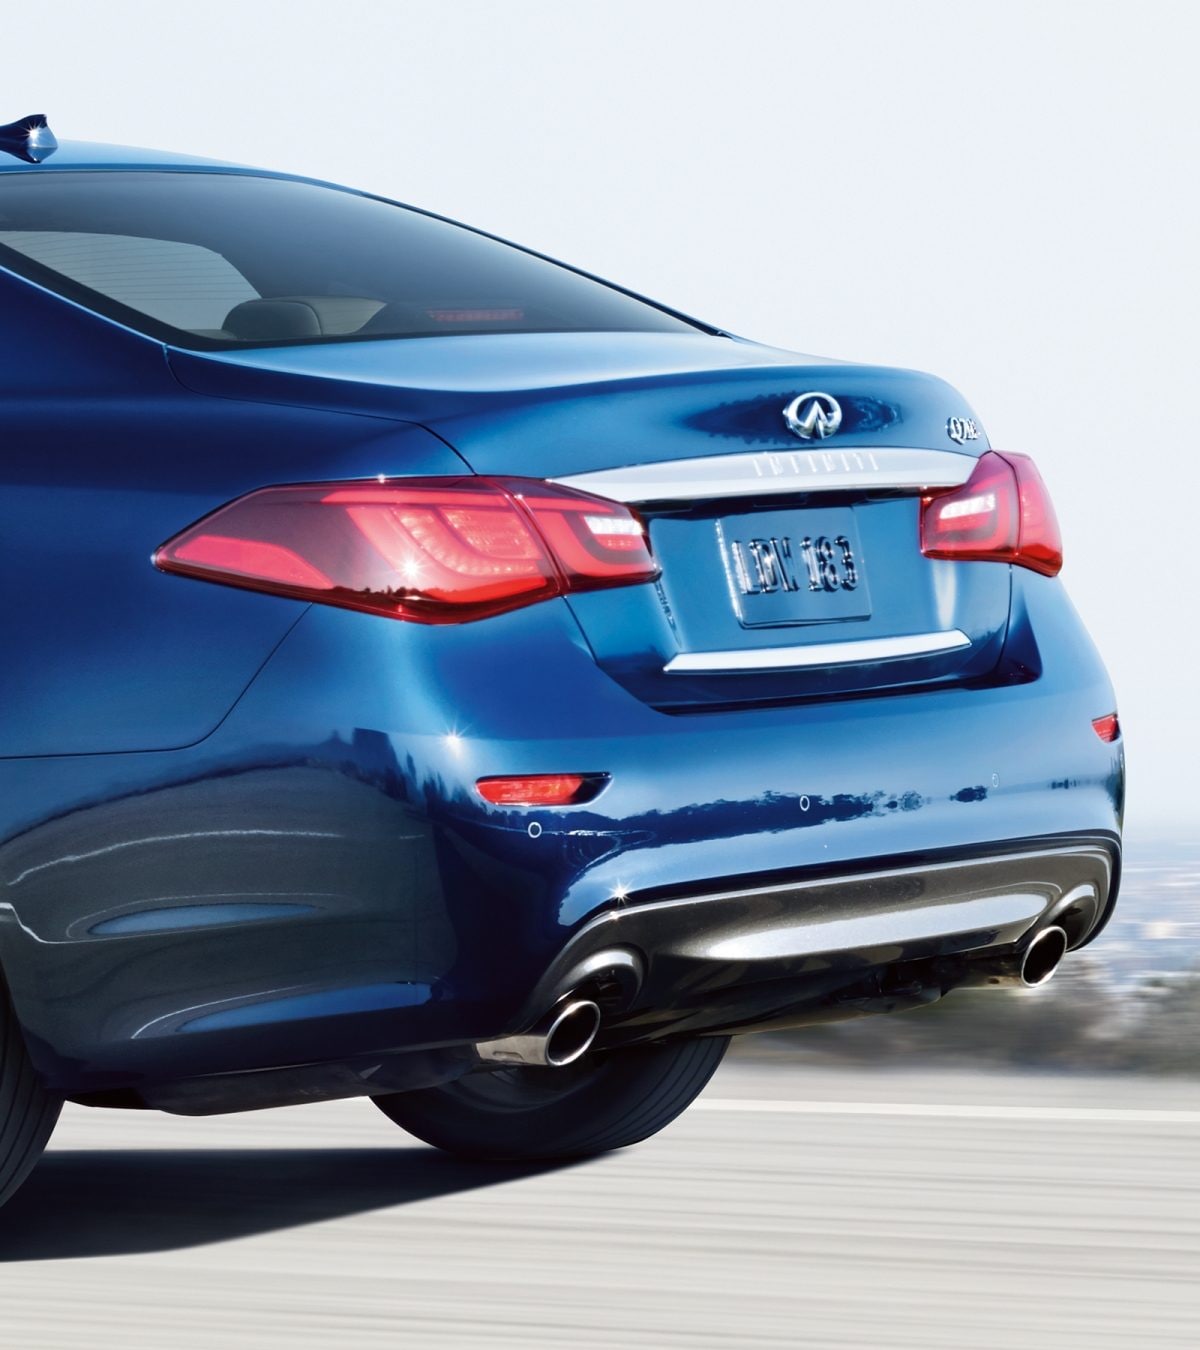 Exterior Rear Profile View Of The 2019 INFINITI Q70 Luxury Sedan&#39;s Exhaust And Tail Lights Shown In Hermosa Blue